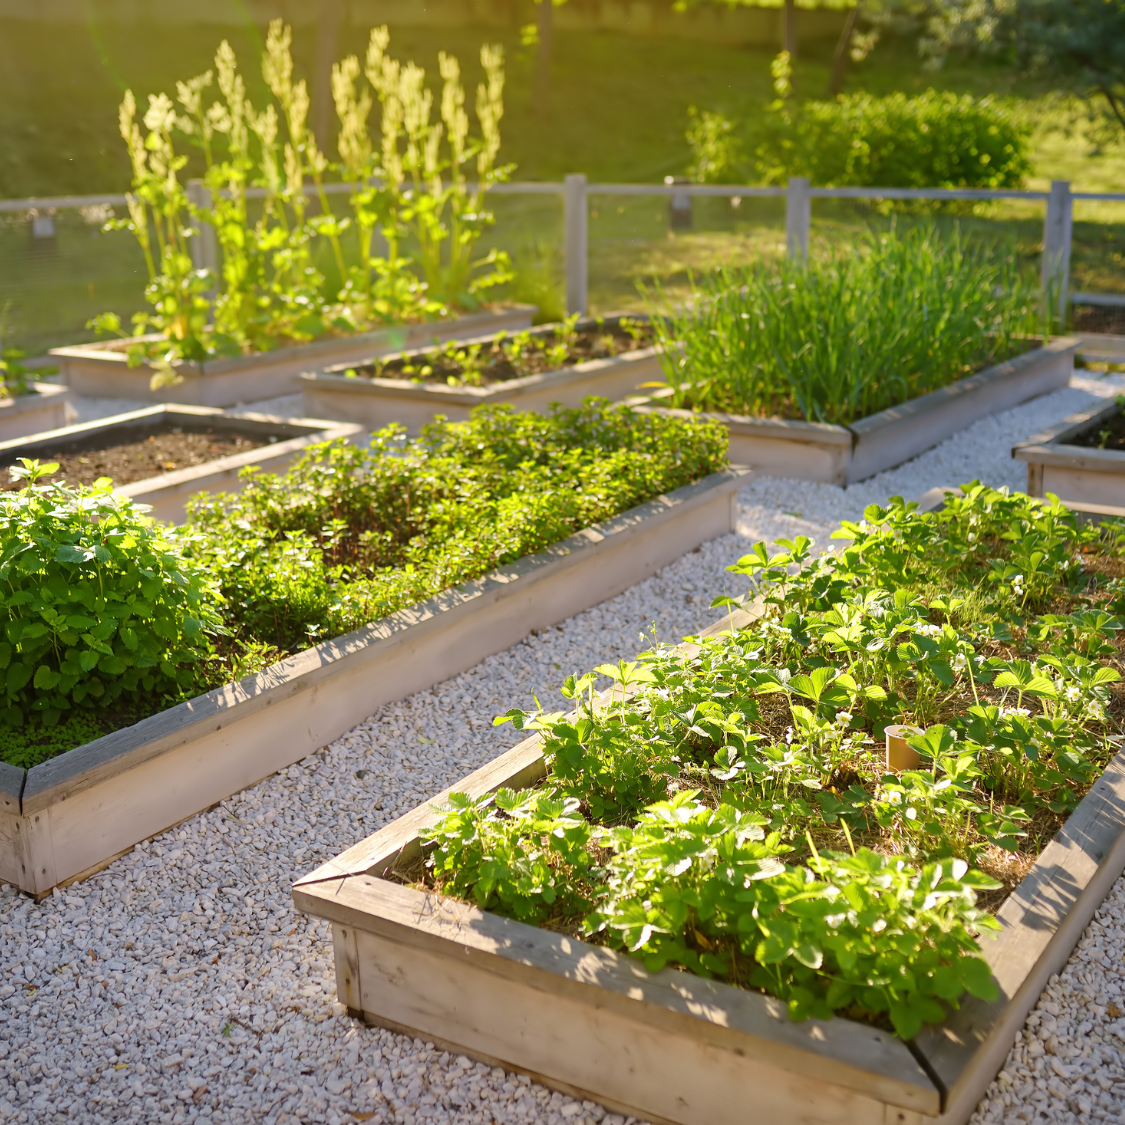 3 Benefits of Having a Garden at a Workplace